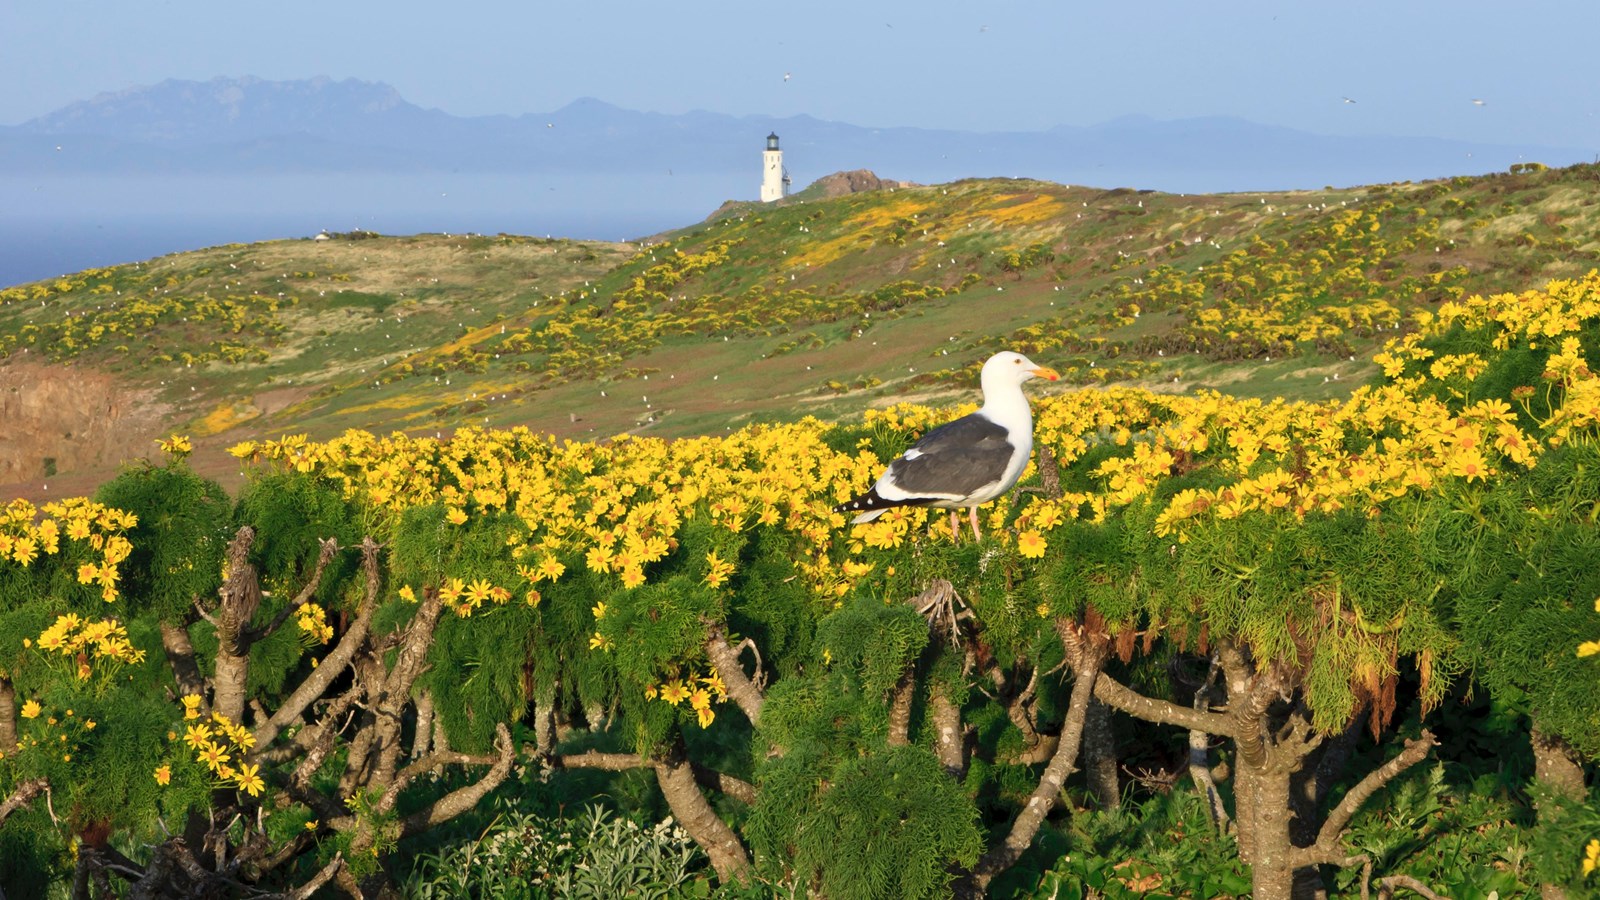 Seagull standing on plant with green leaves and yellow flowers.